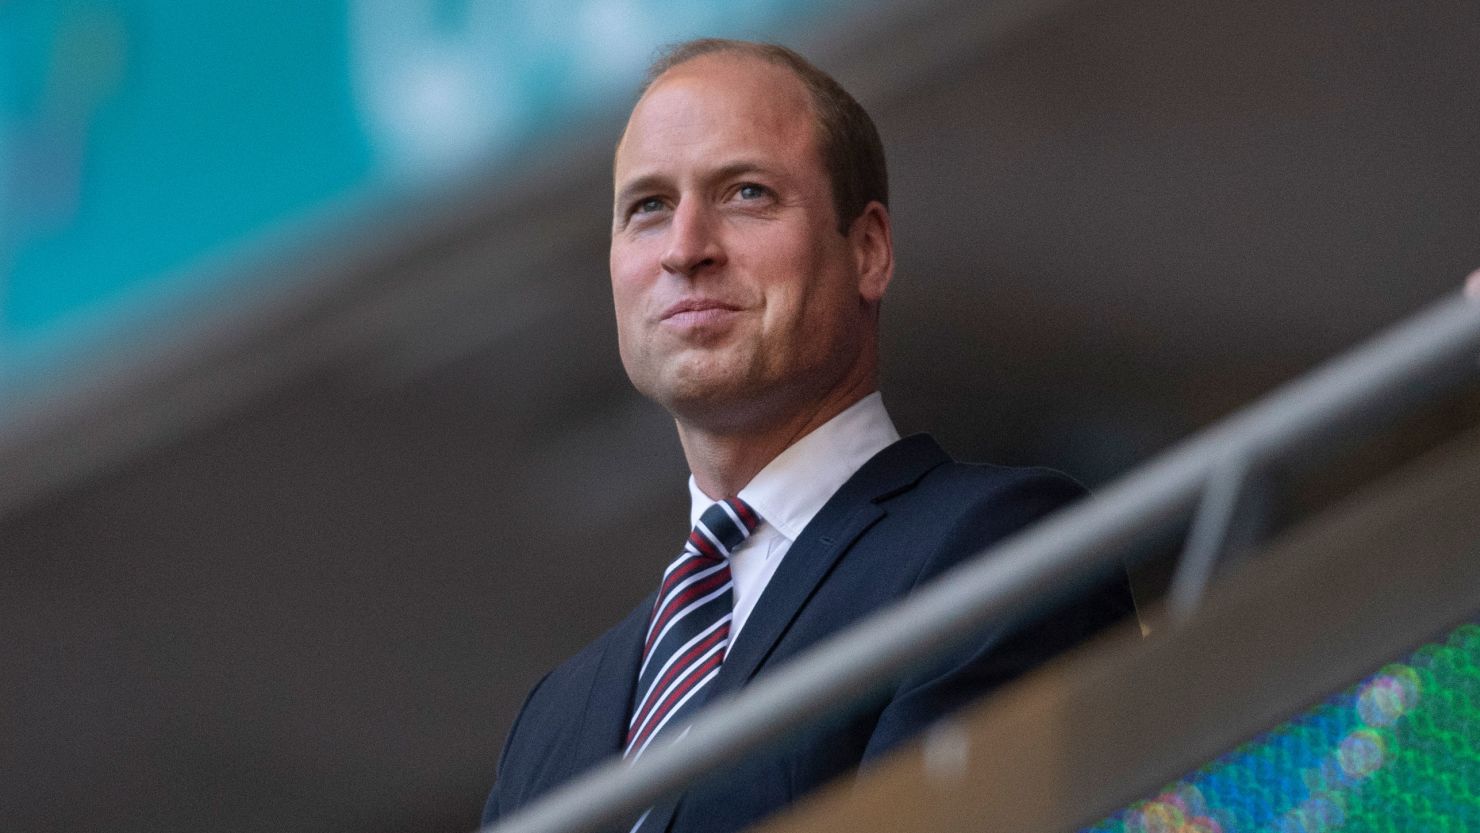 Prince William watches the UEFA Euro 2020 Championship semi-final between England and Denmark on Wednesday. 